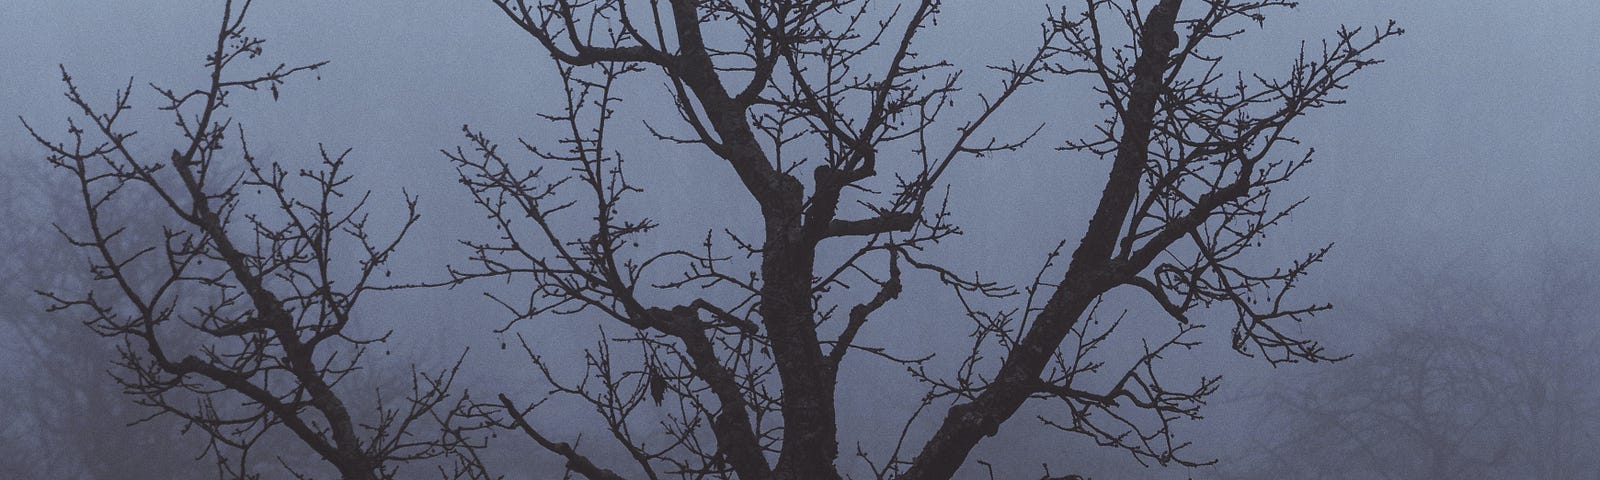 A gray, gloomy day with a leafless tree.